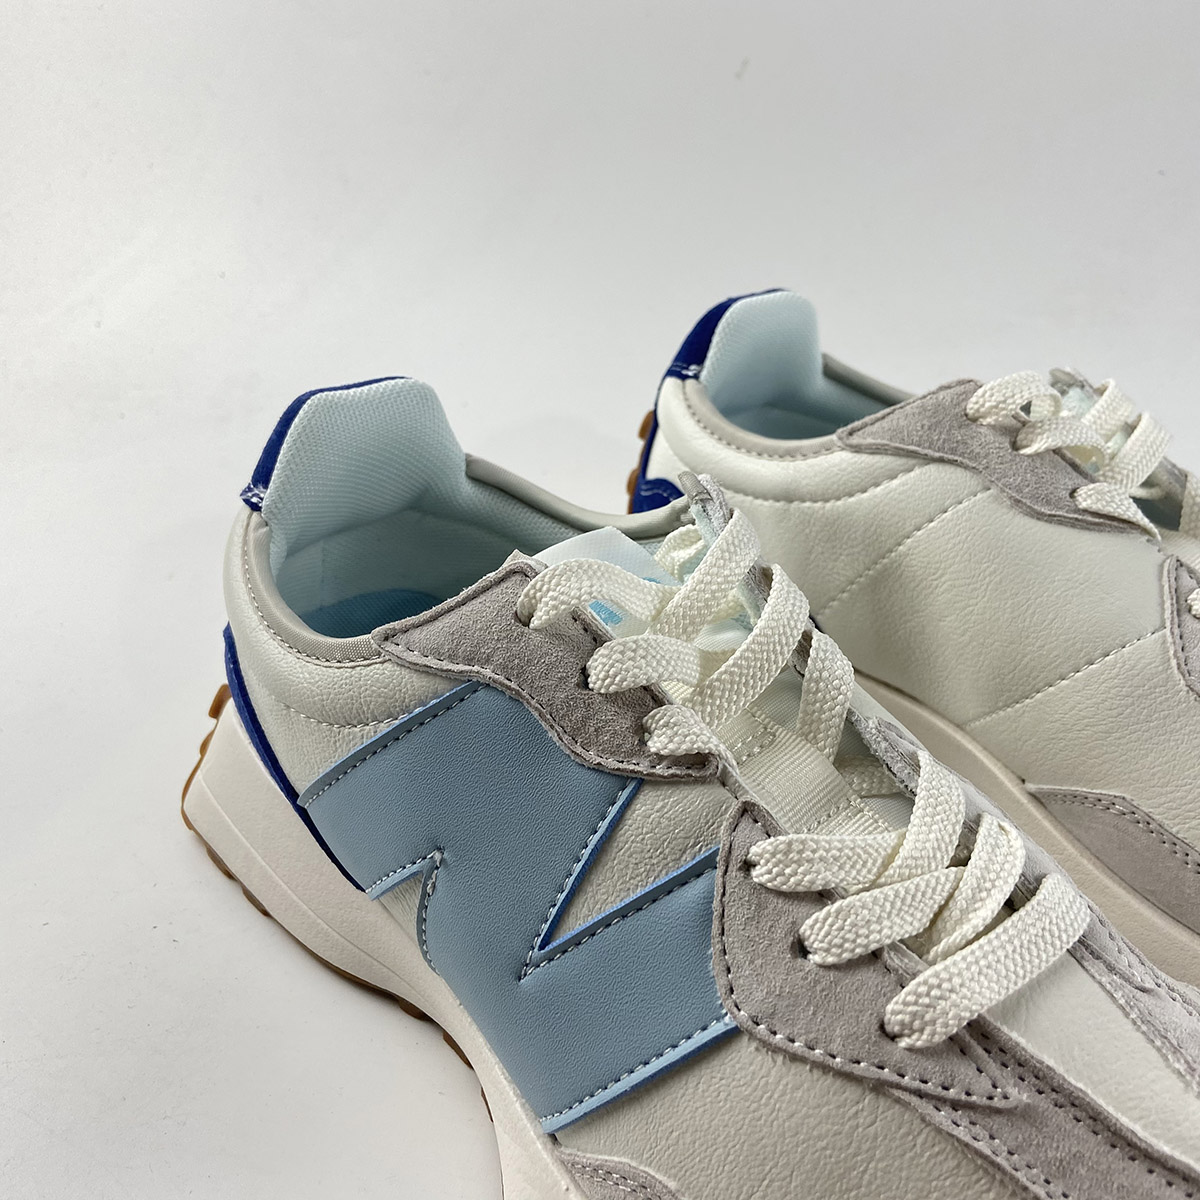 STAUD x New Balance 327 White Grey For Sale – The Sole Line